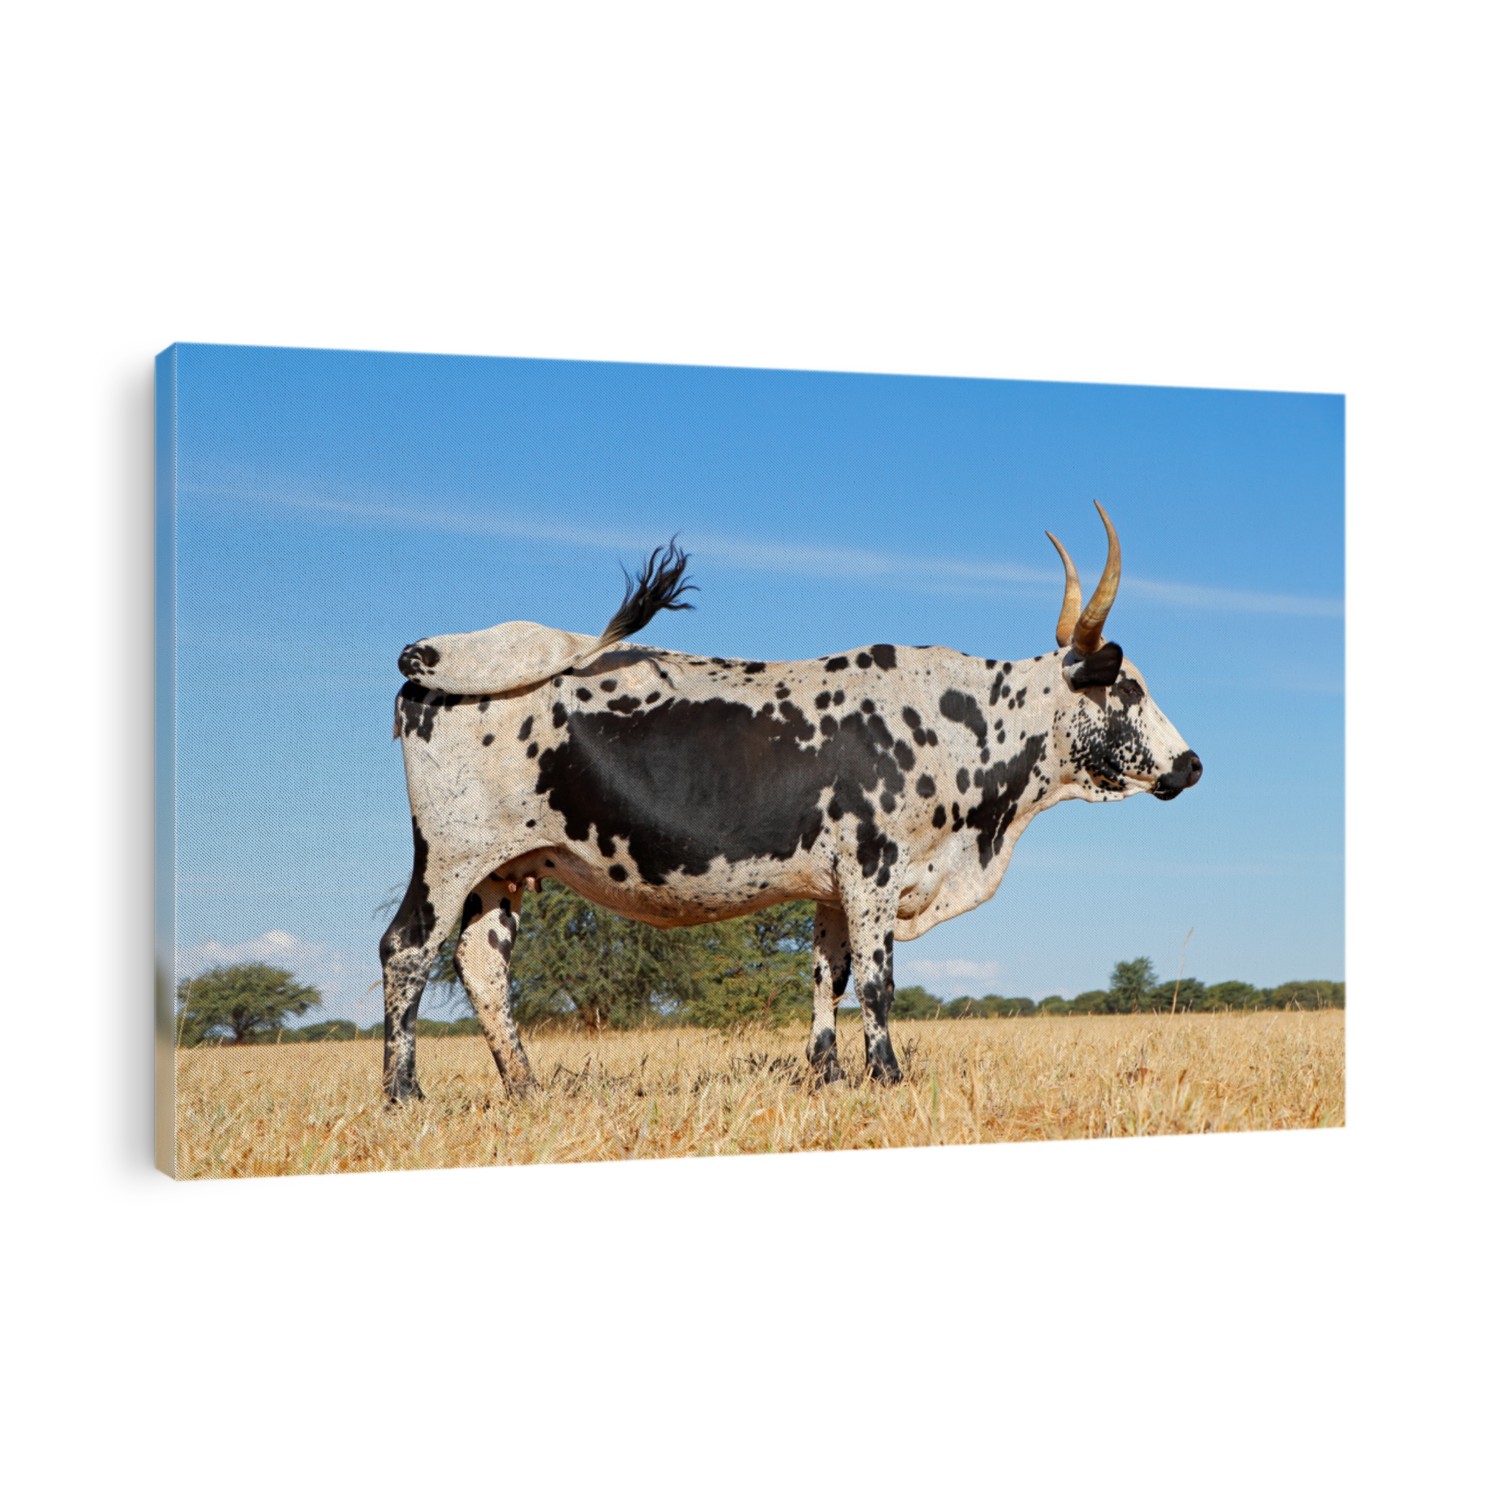 Nguni cow - indigenous cattle breed of South Africa - on a rural farm
